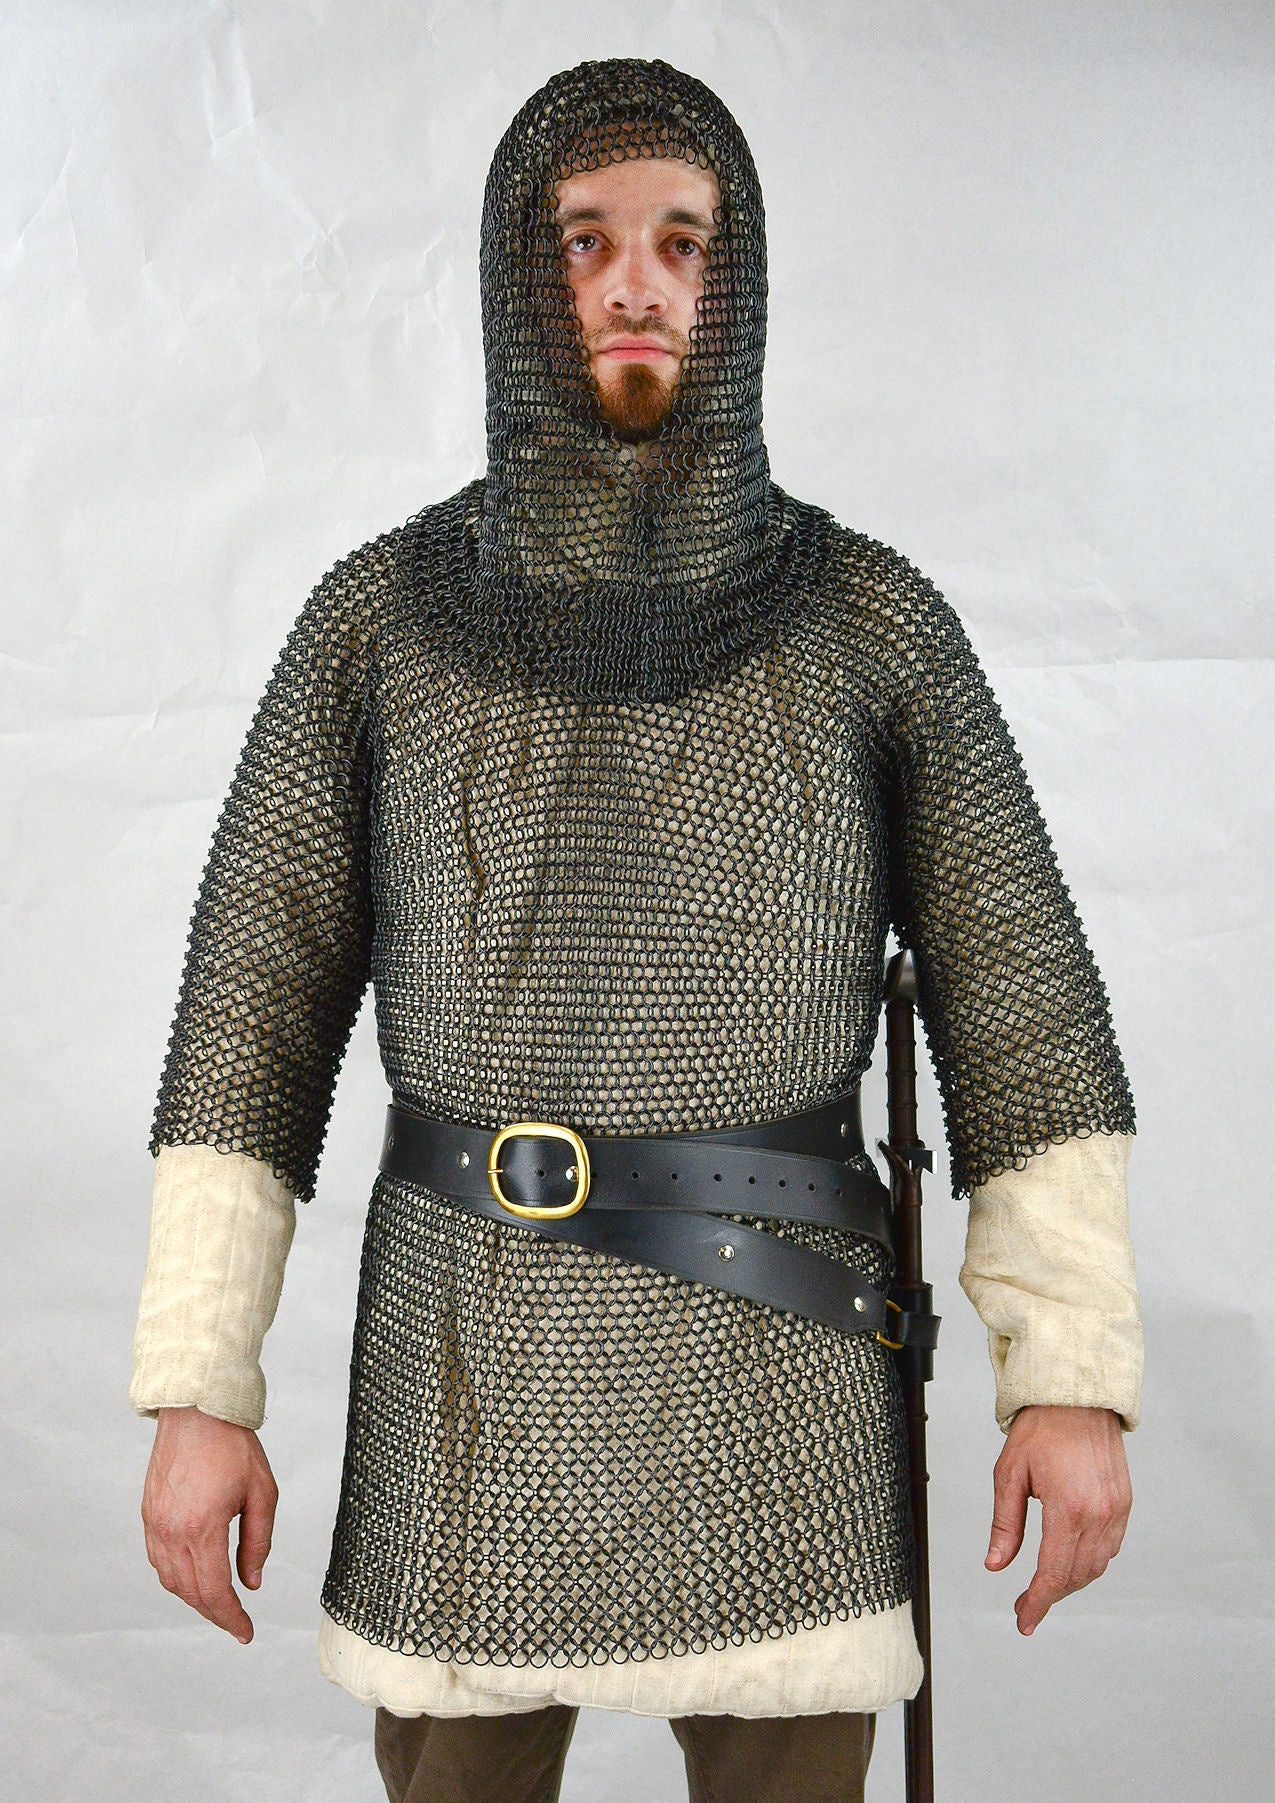 BRBM - Blackened Chainmail Haubergeon and Coif Set - Butted Round Rings